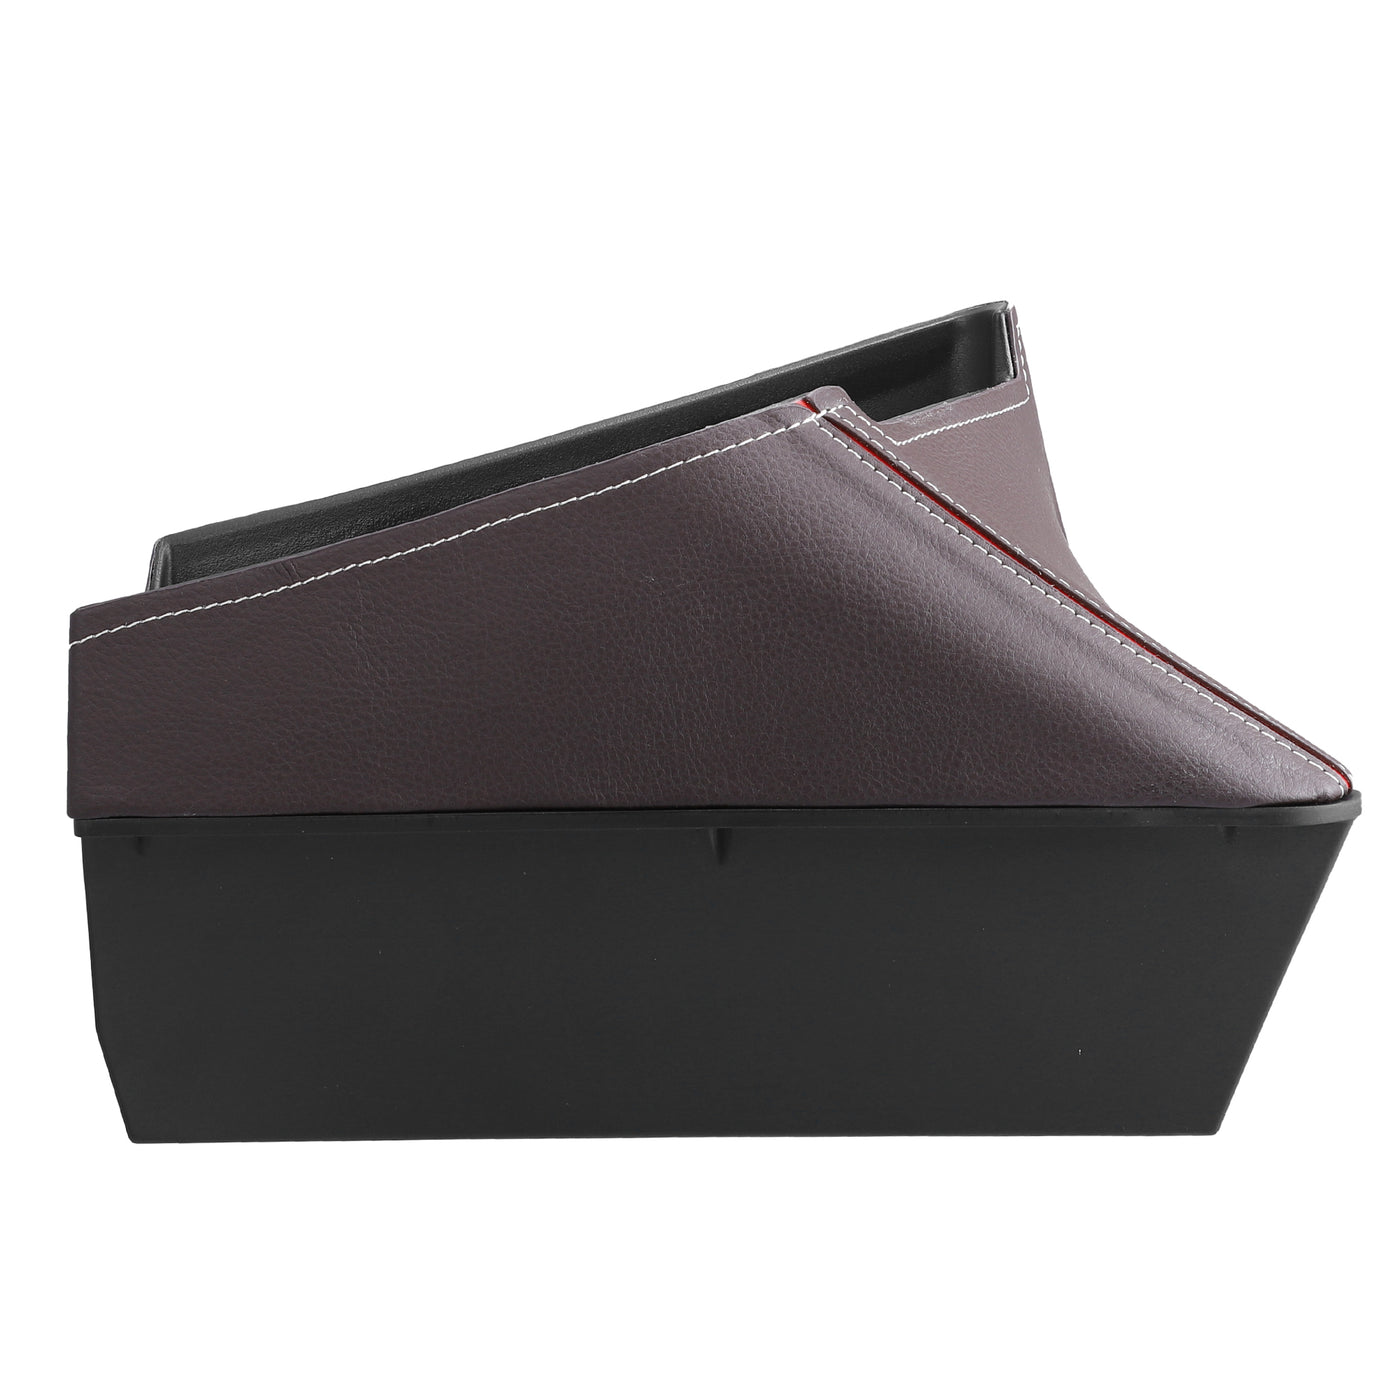 X AUTOHAUX Car Center Armrest ABS Storage Box Organizer Container Tray for BMW X1 F48 2016-2021 for BMW X2 F47 2018-2021 Red Side Brown